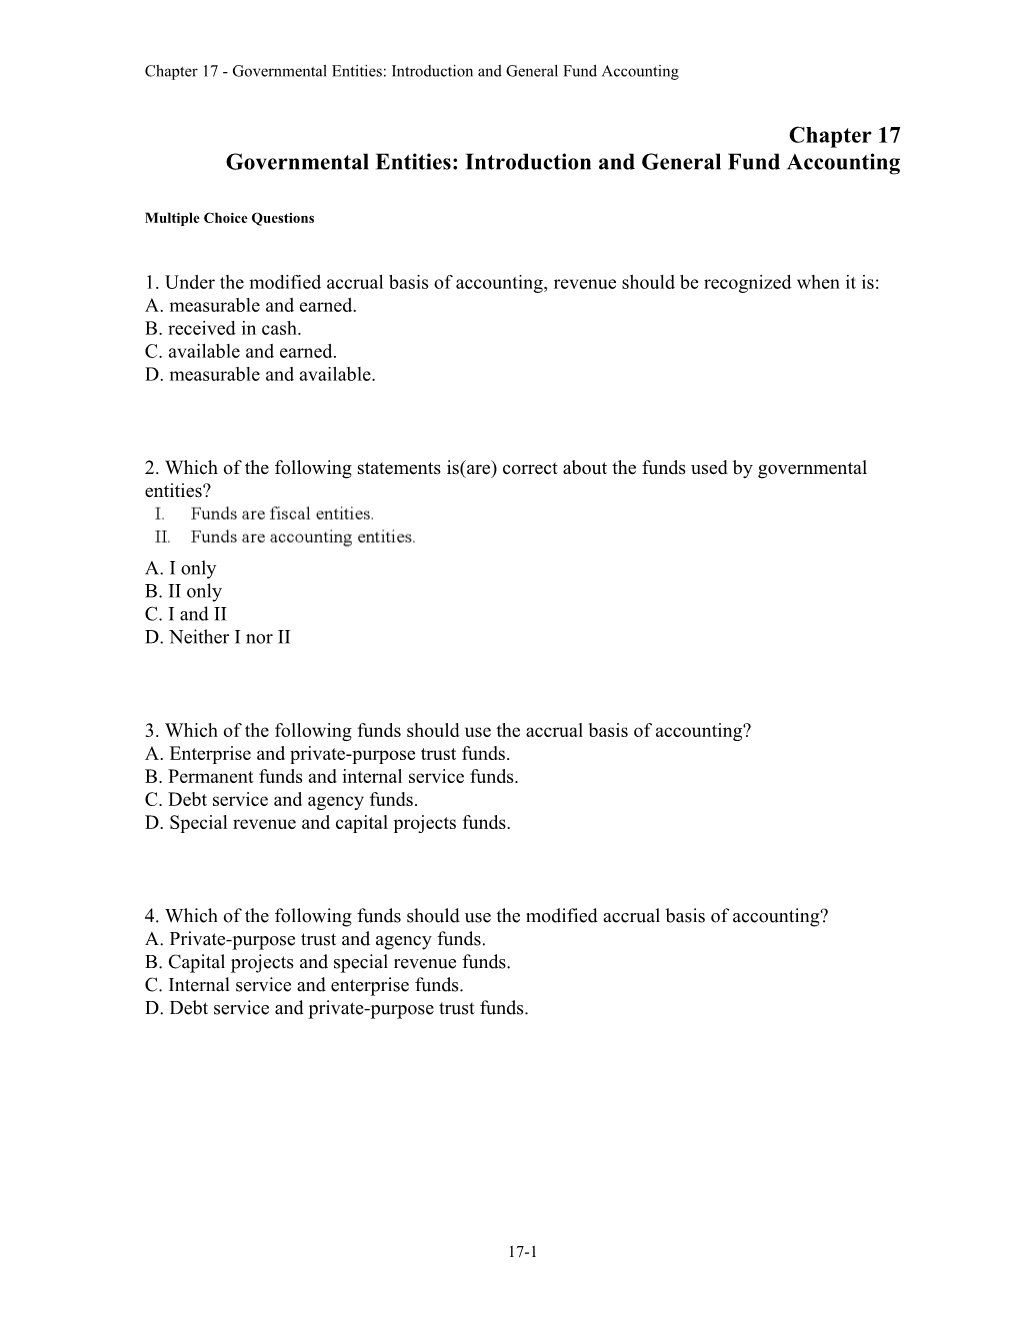 Chapter 17 Governmental Entities: Introduction and General Fund Accounting